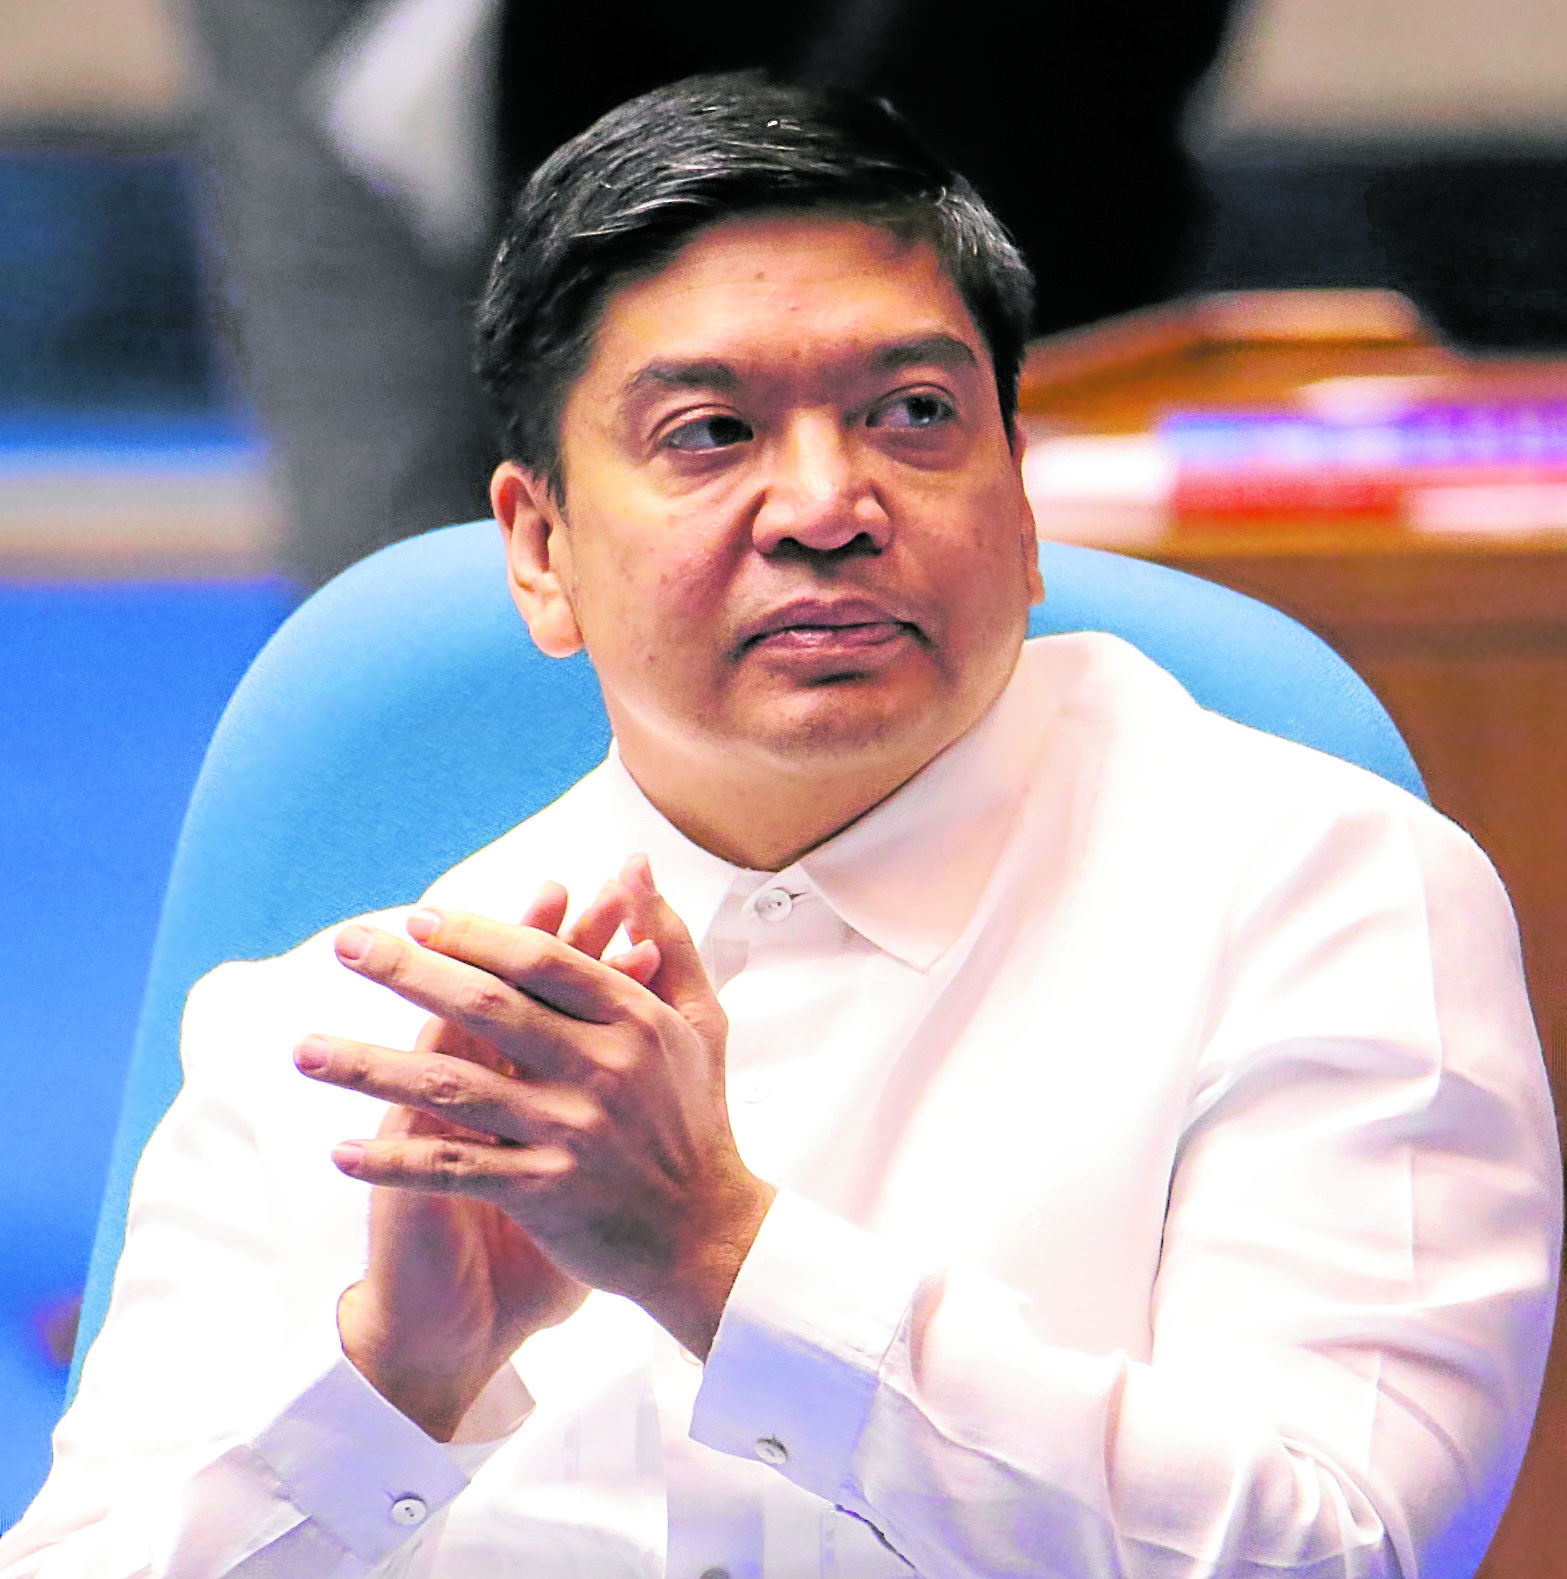 solon suggests a 2026 barangay polls, avoid shorter terms for incumbent execs